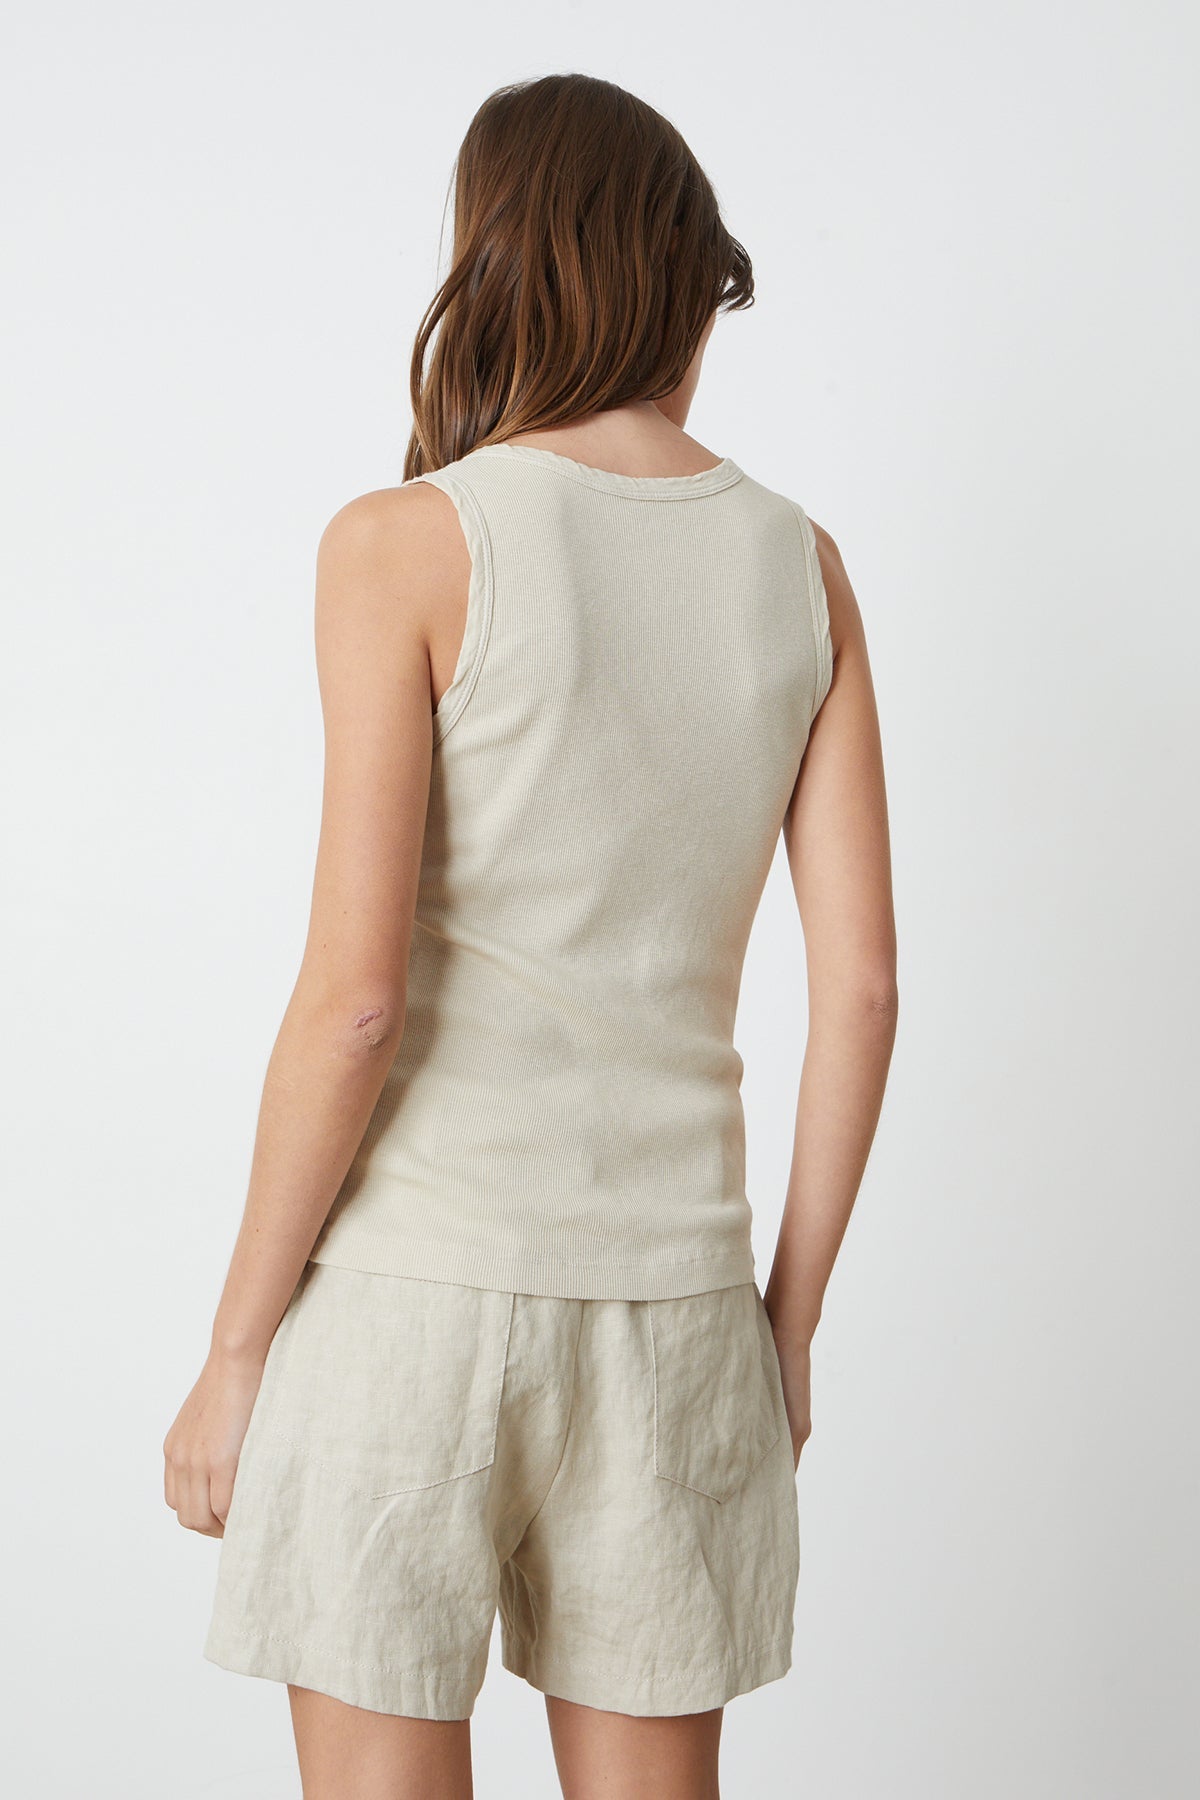 The back view of a woman wearing a Velvet by Graham & Spencer MAXIE RIBBED TANK TOP and shorts.-35206386122945